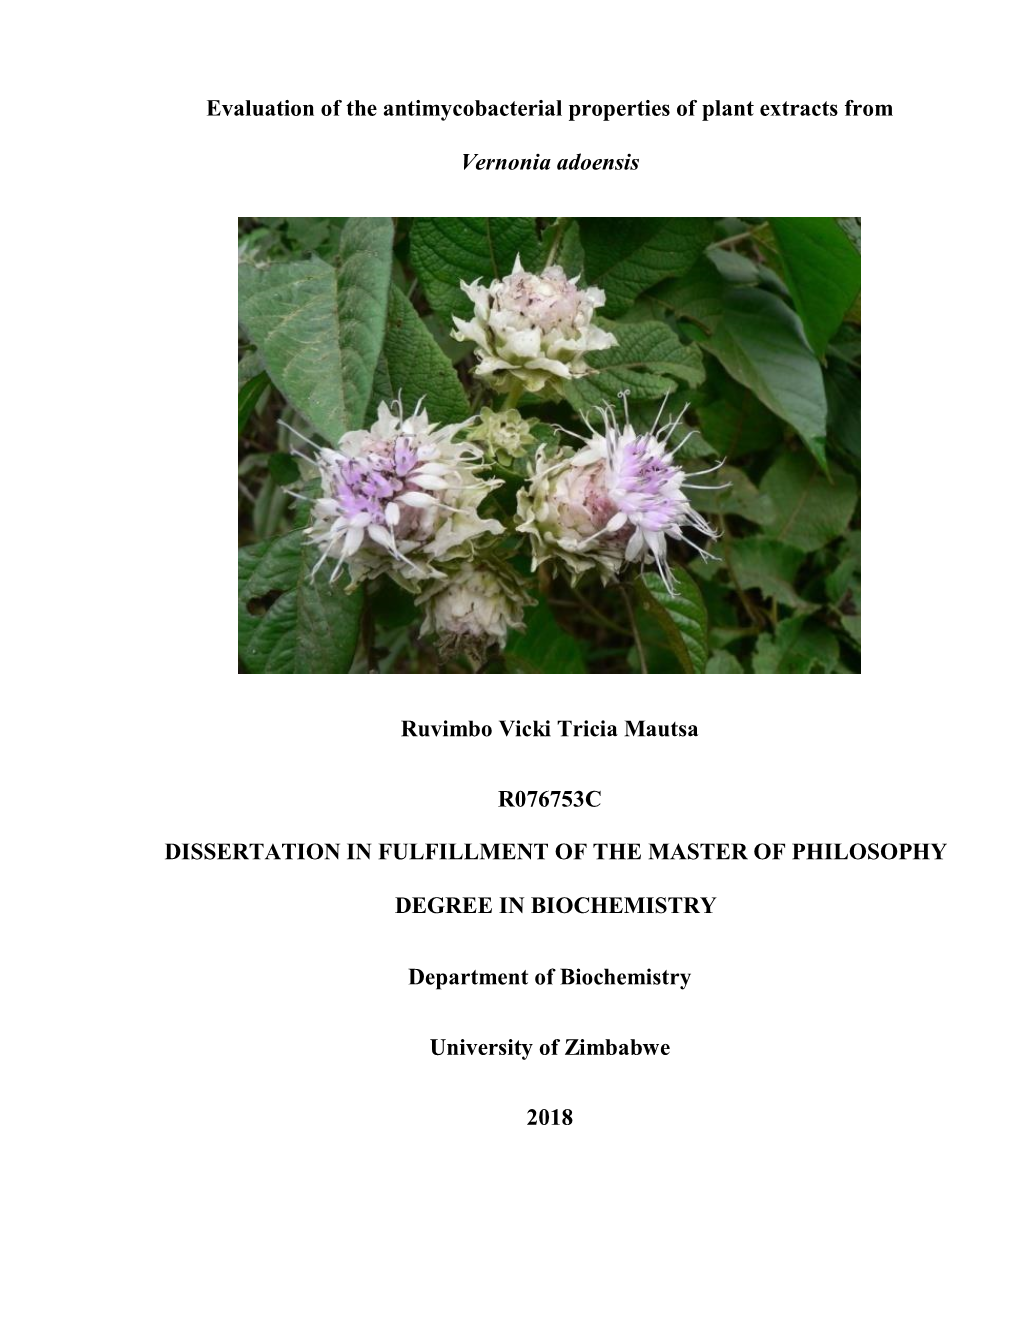 Evaluation of the Antimycobacterial Properties of Plant Extracts From